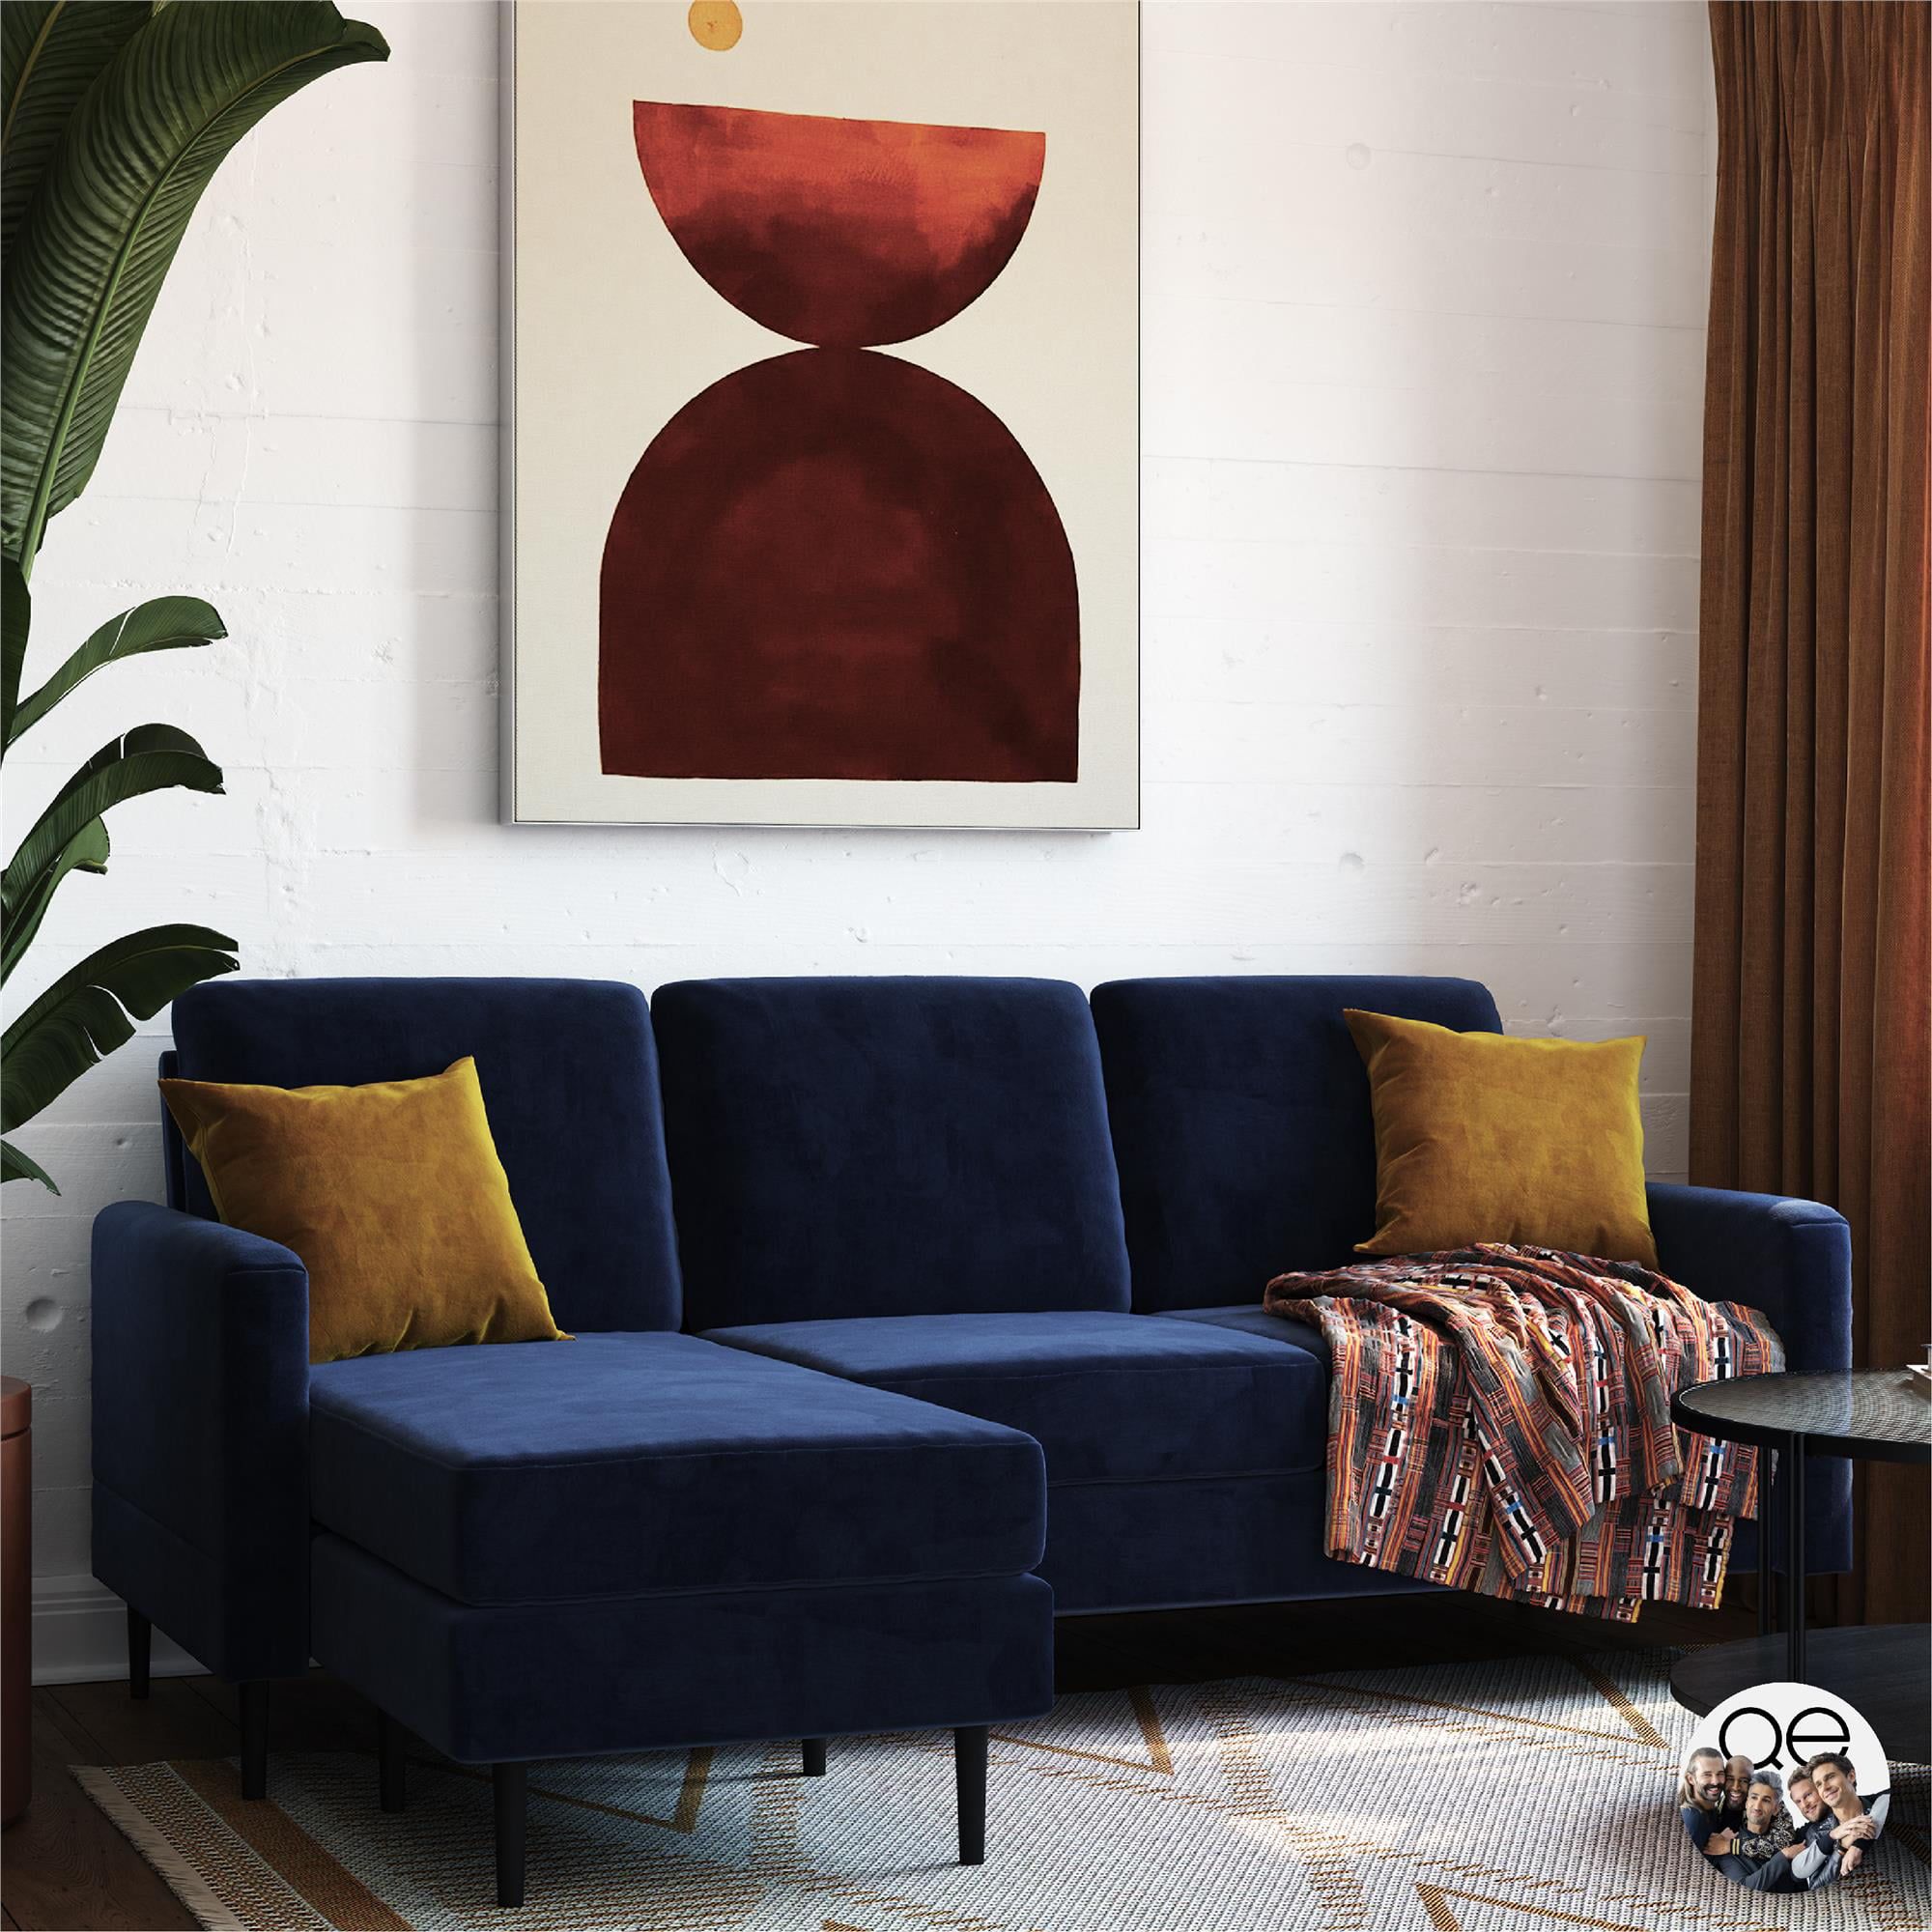 Queer Eye Wimberly Pillowback Sofa Sectional, Blue Velvet – Walmart For Pillowback Sofa Sectionals (View 3 of 15)